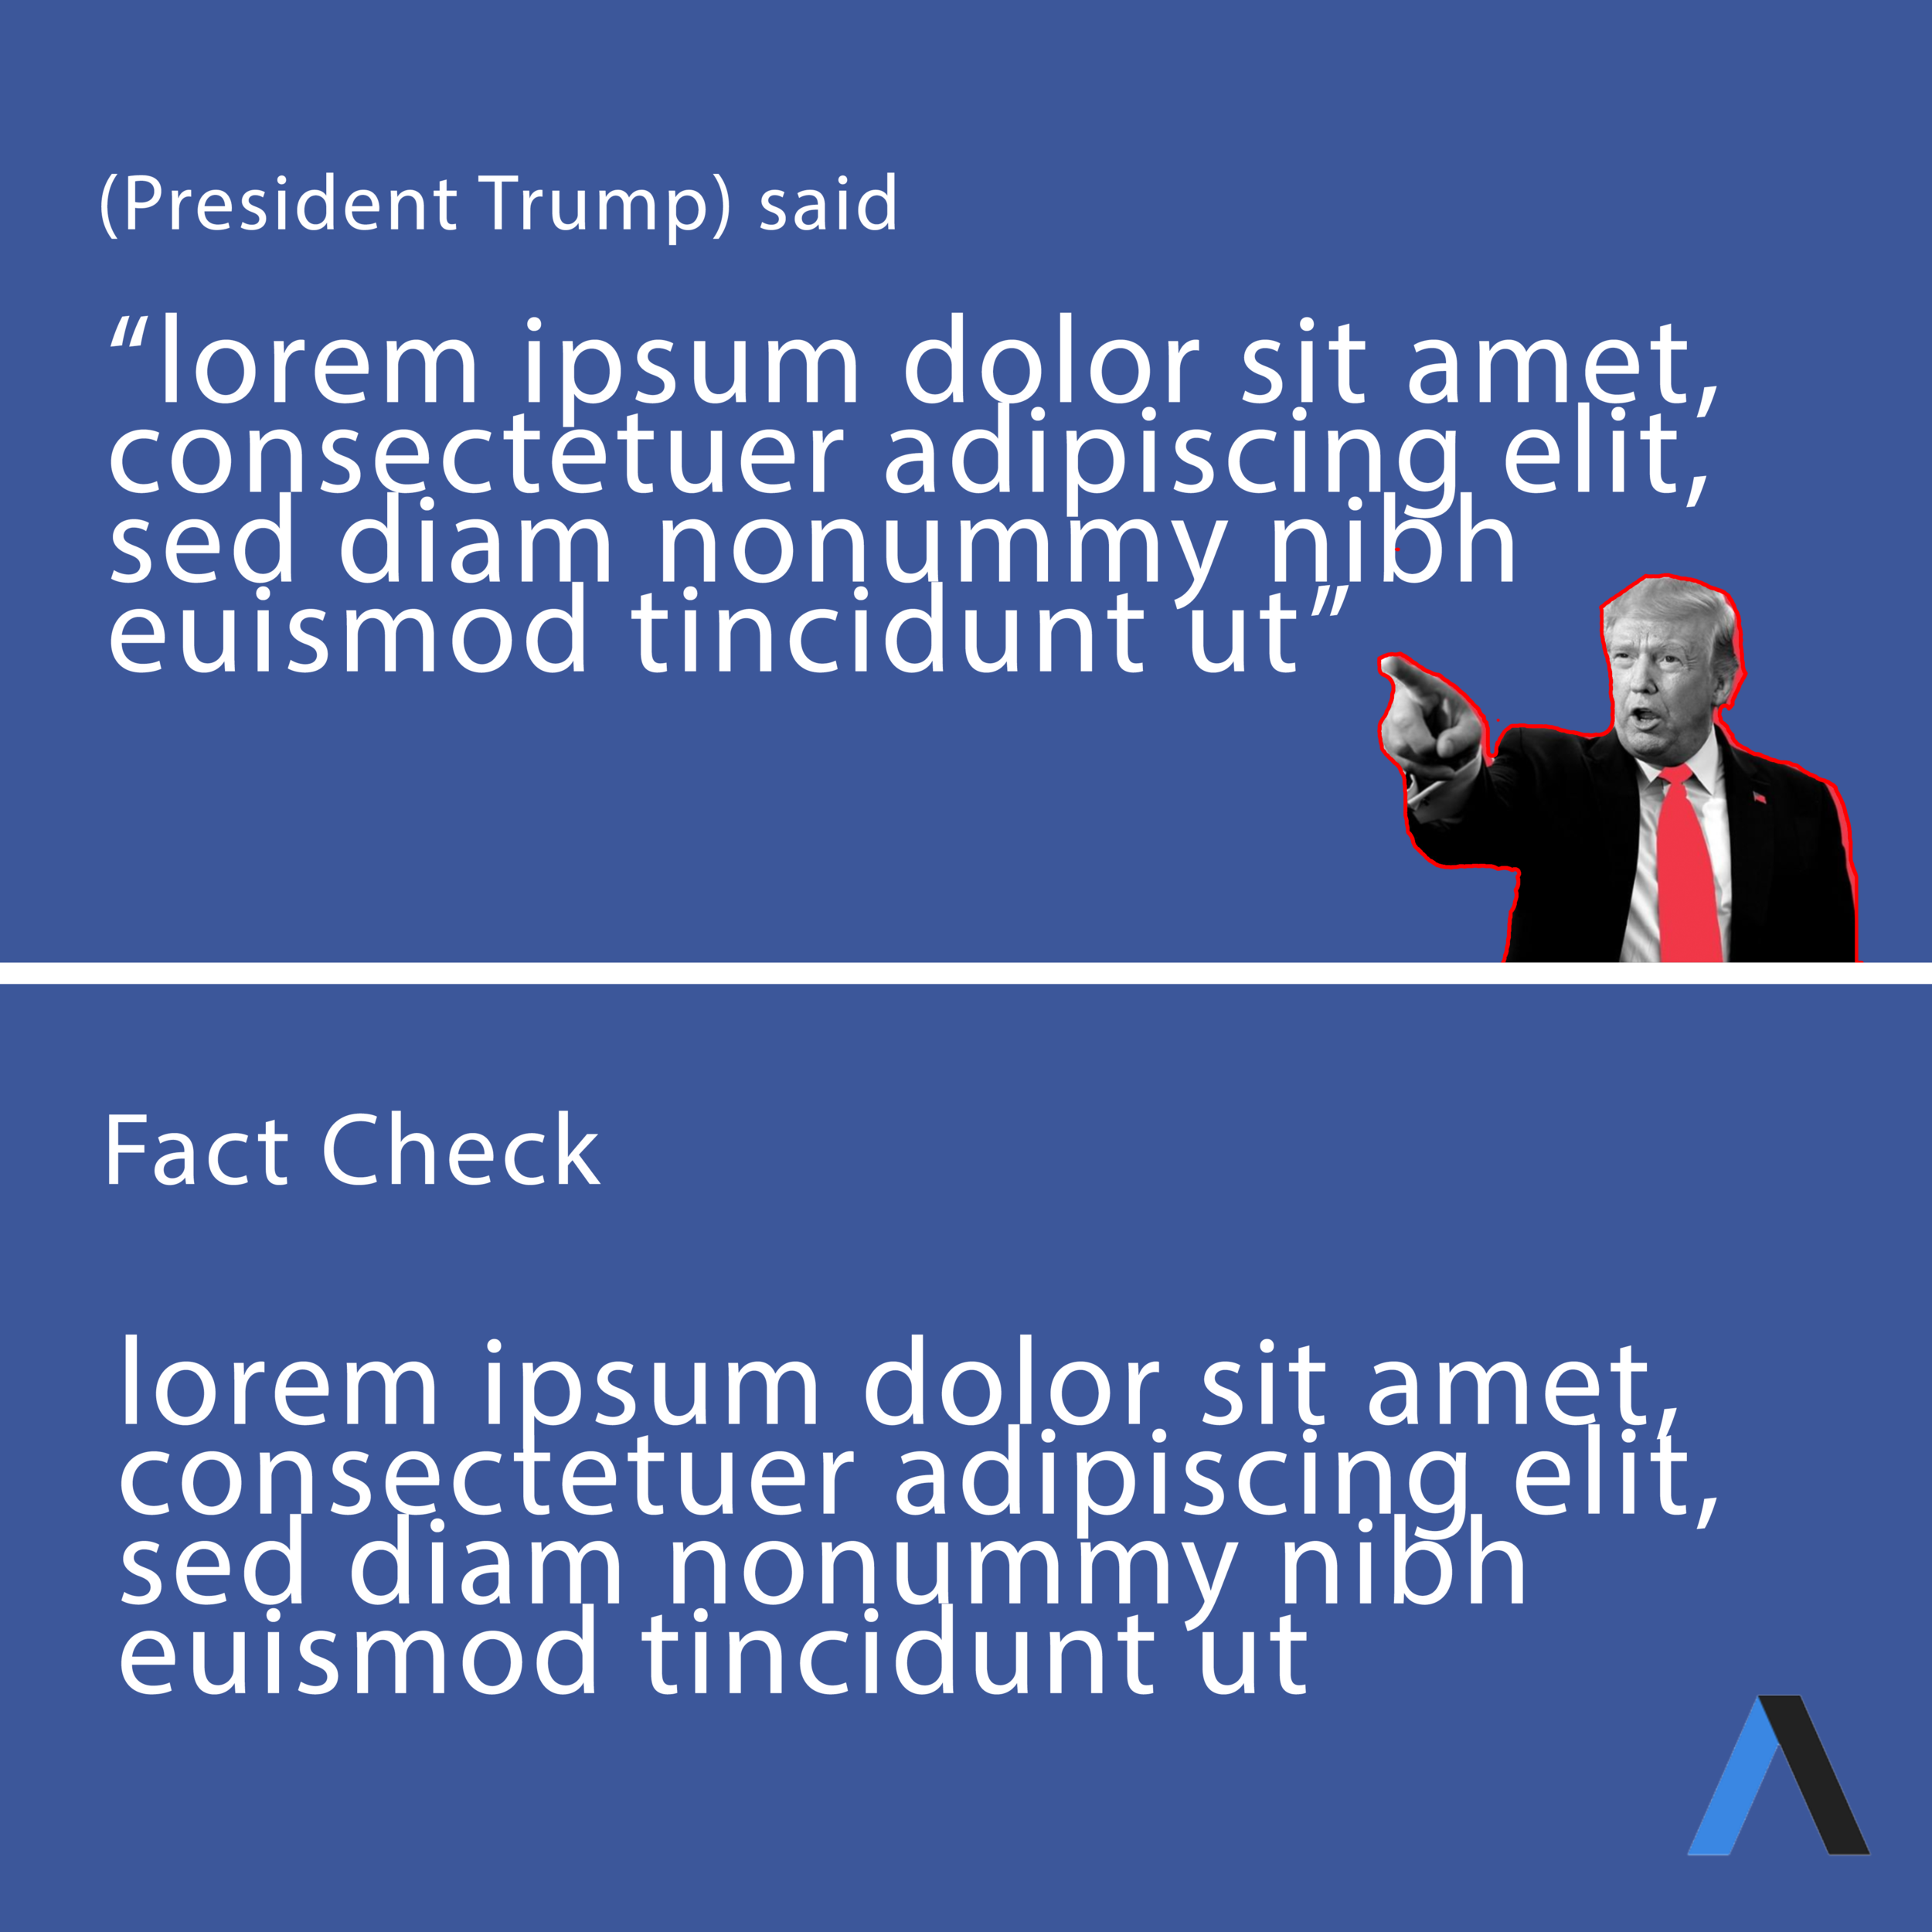 AxiosTemplate-Fact Check.png